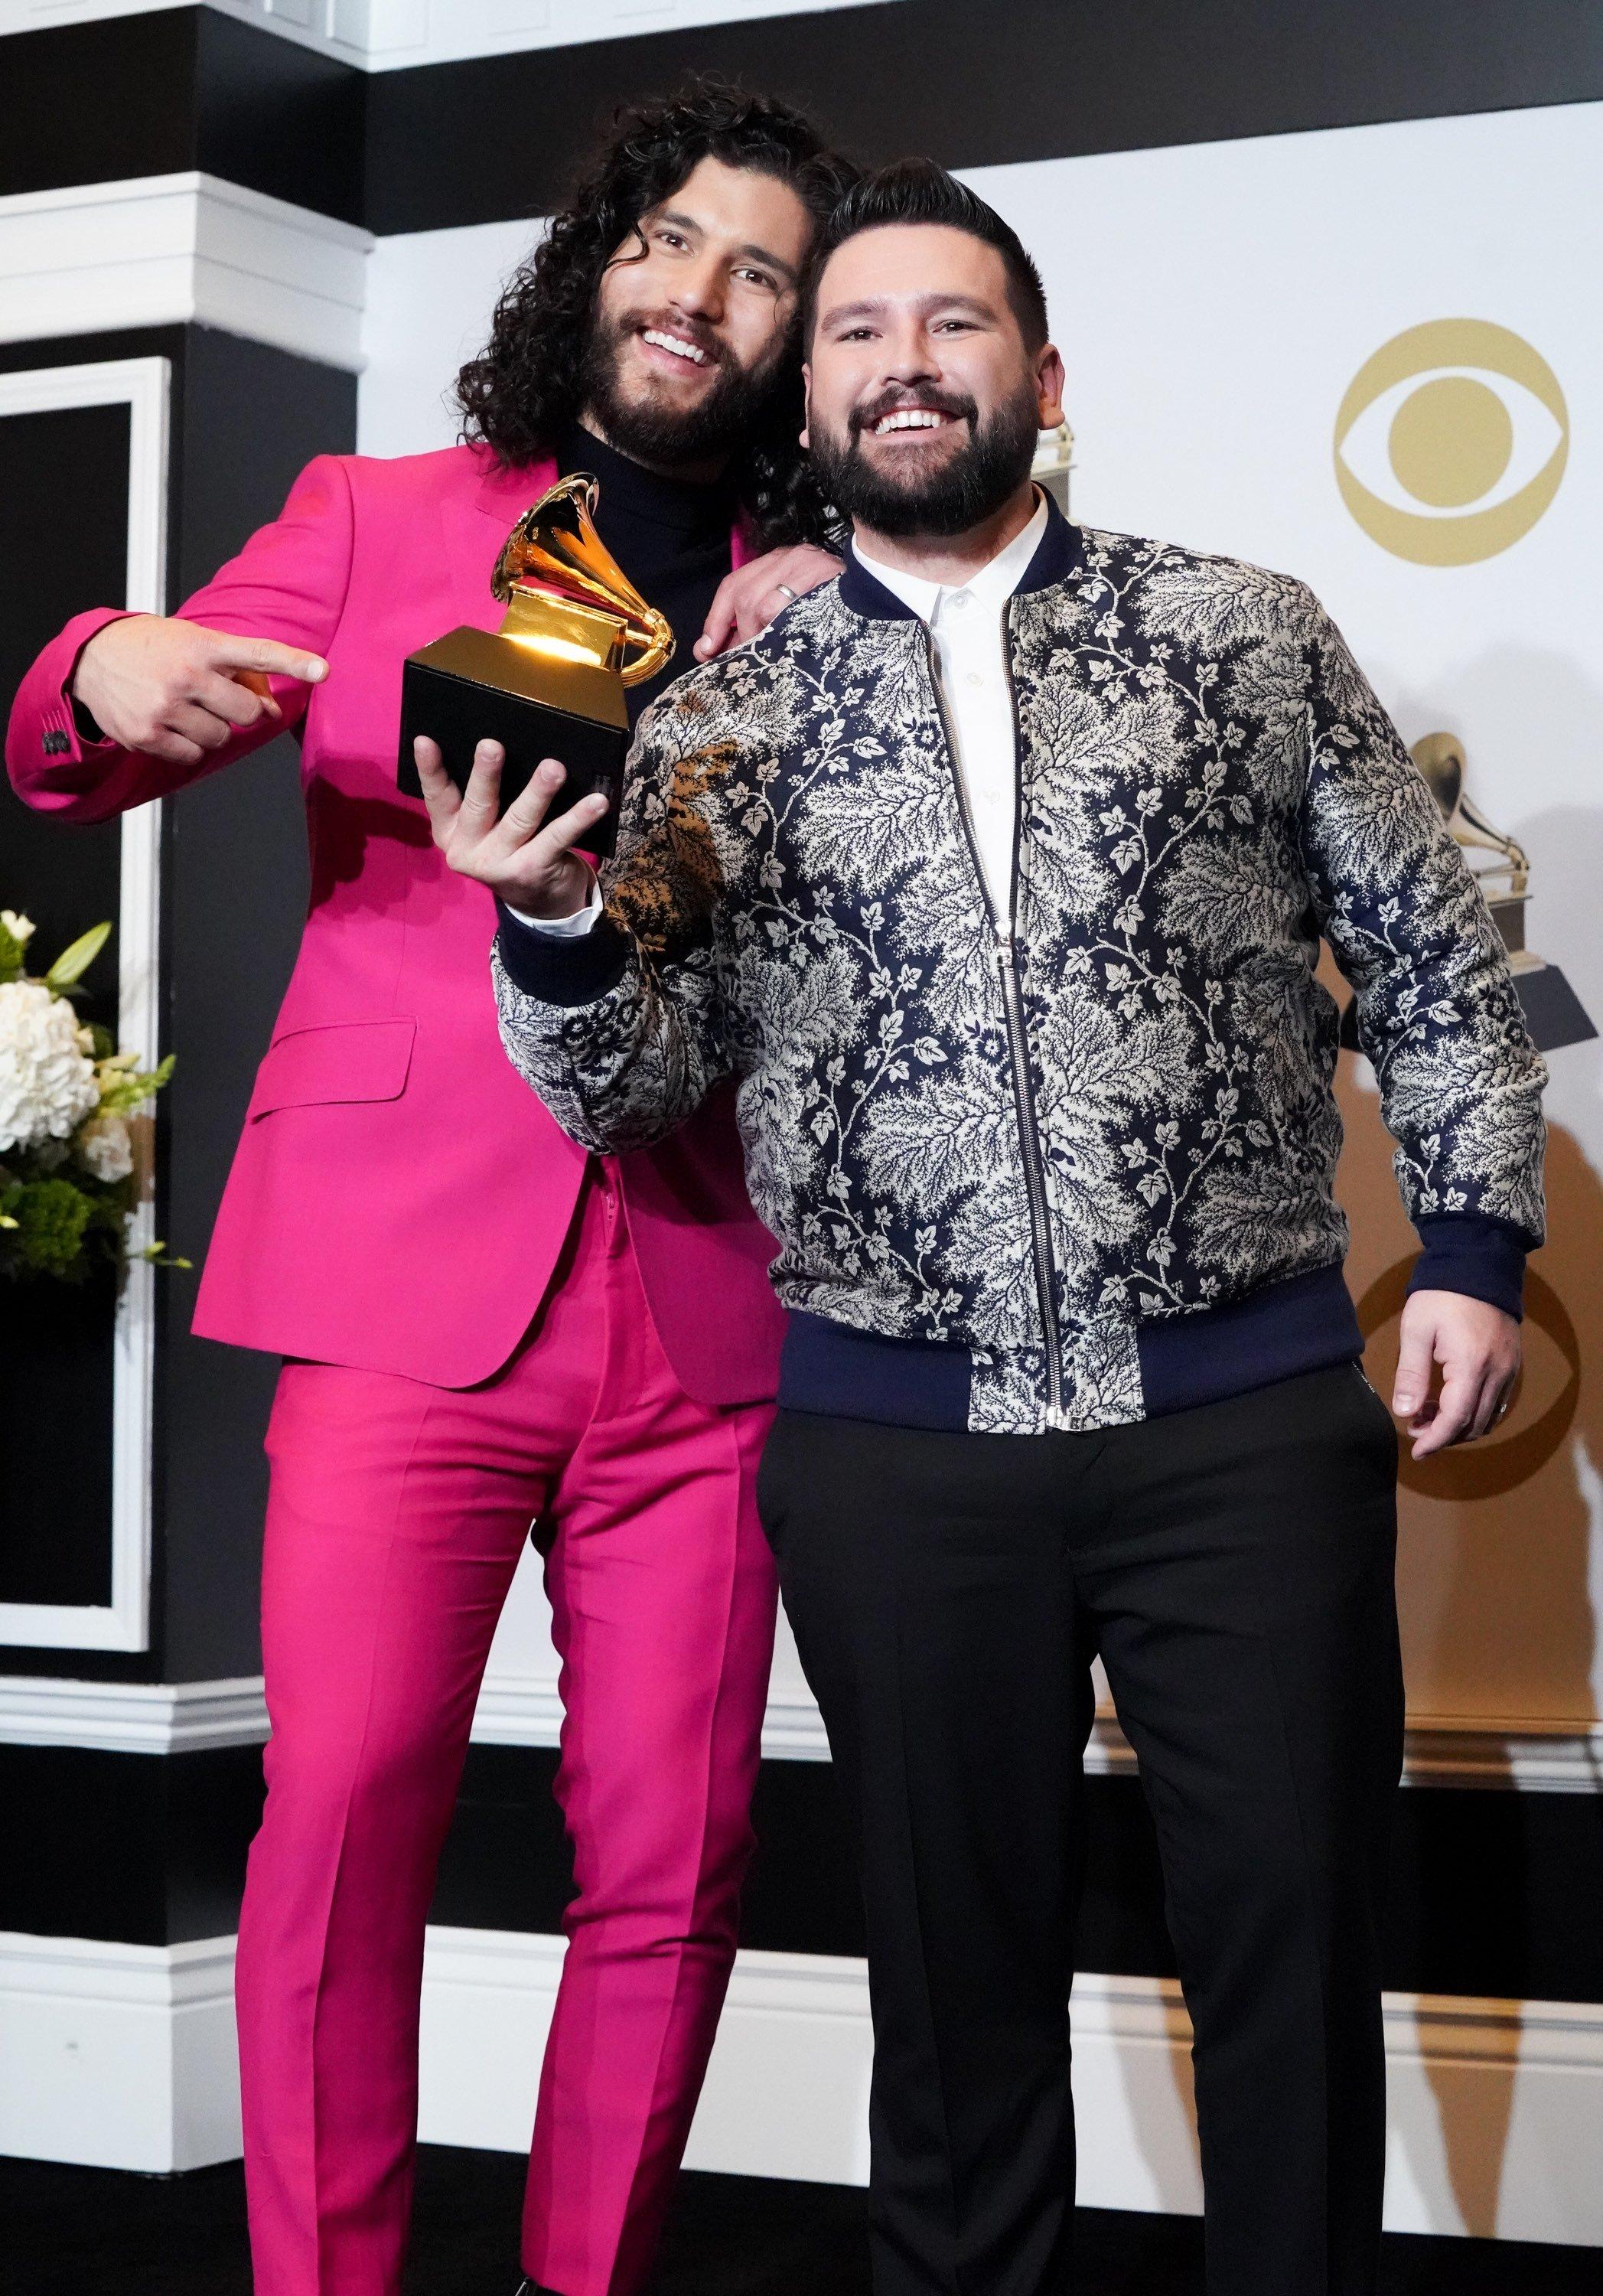 Dan + Shay pose backstage with their GRAMMY at 2020 GRAMMY Awards show